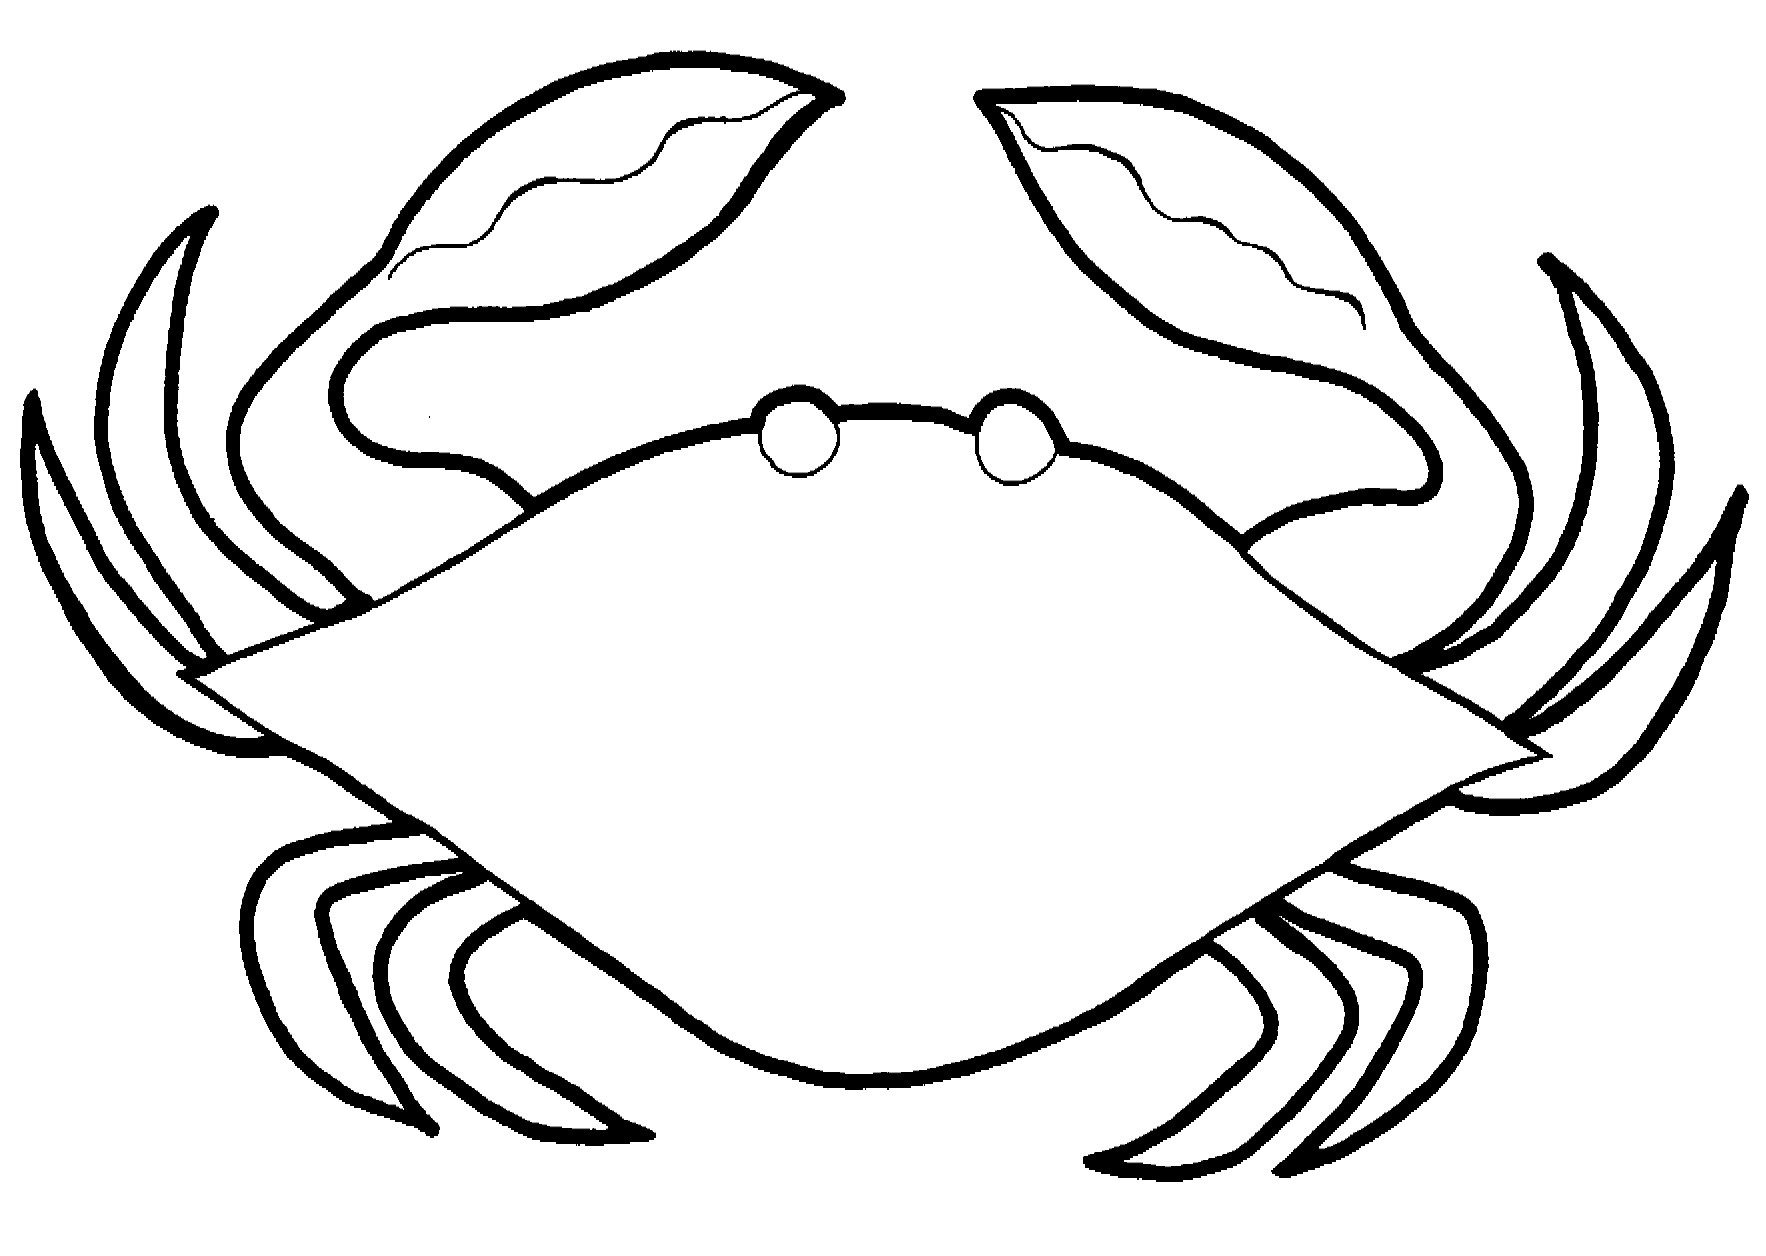 printable-picture-of-a-crab-printable-word-searches